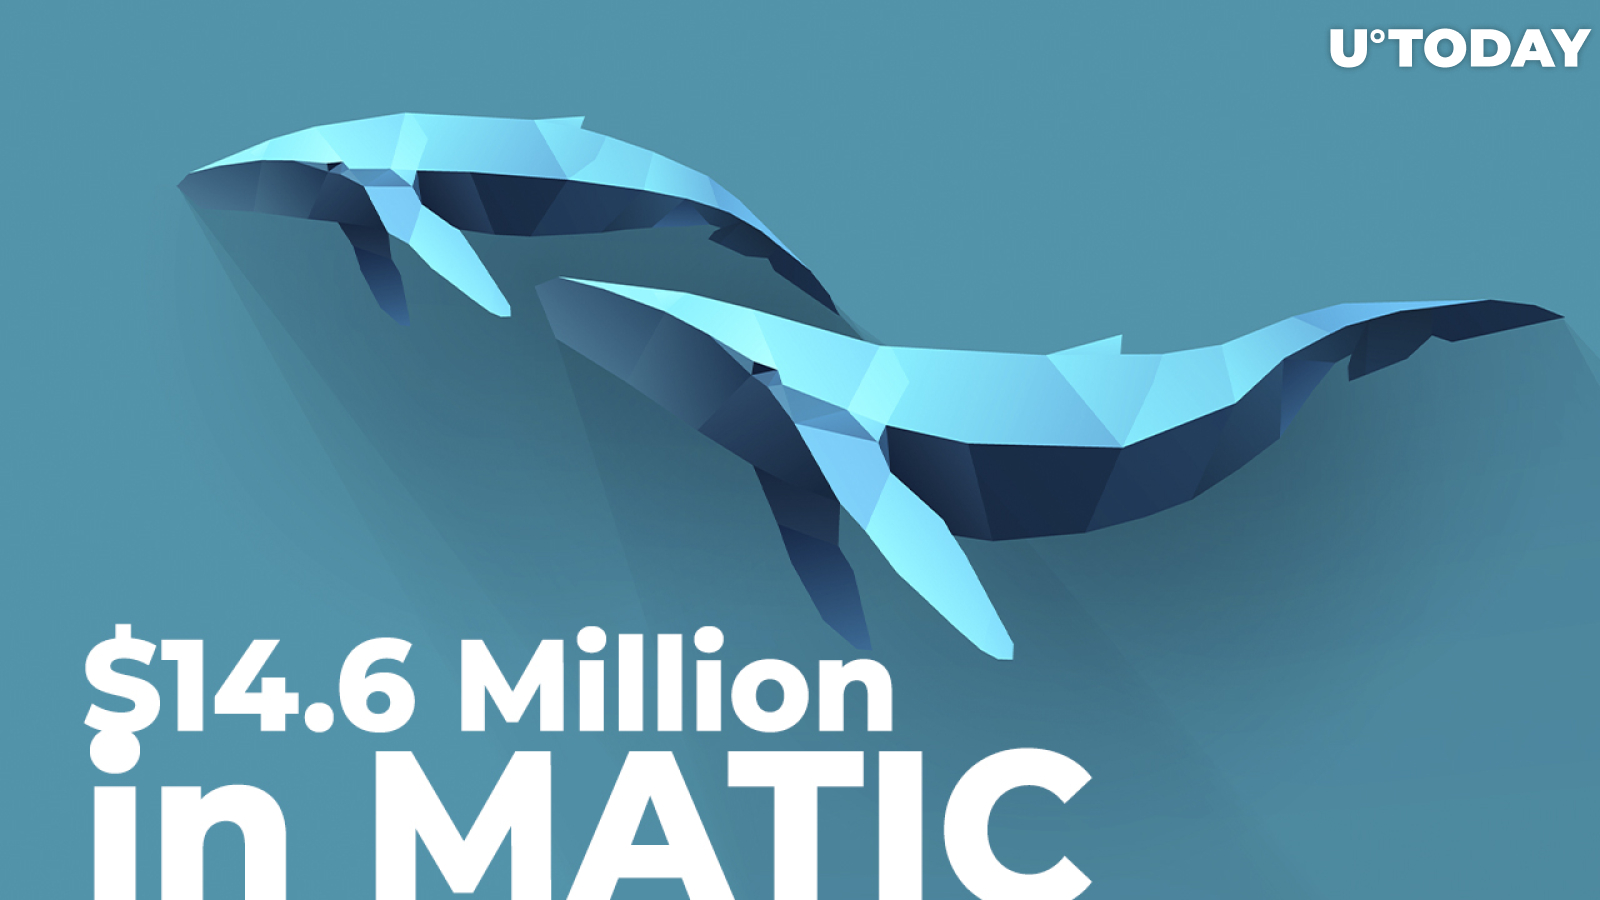 $14.6 Million in MATIC Bought by Major ETH Whales, Moved Away from Binance